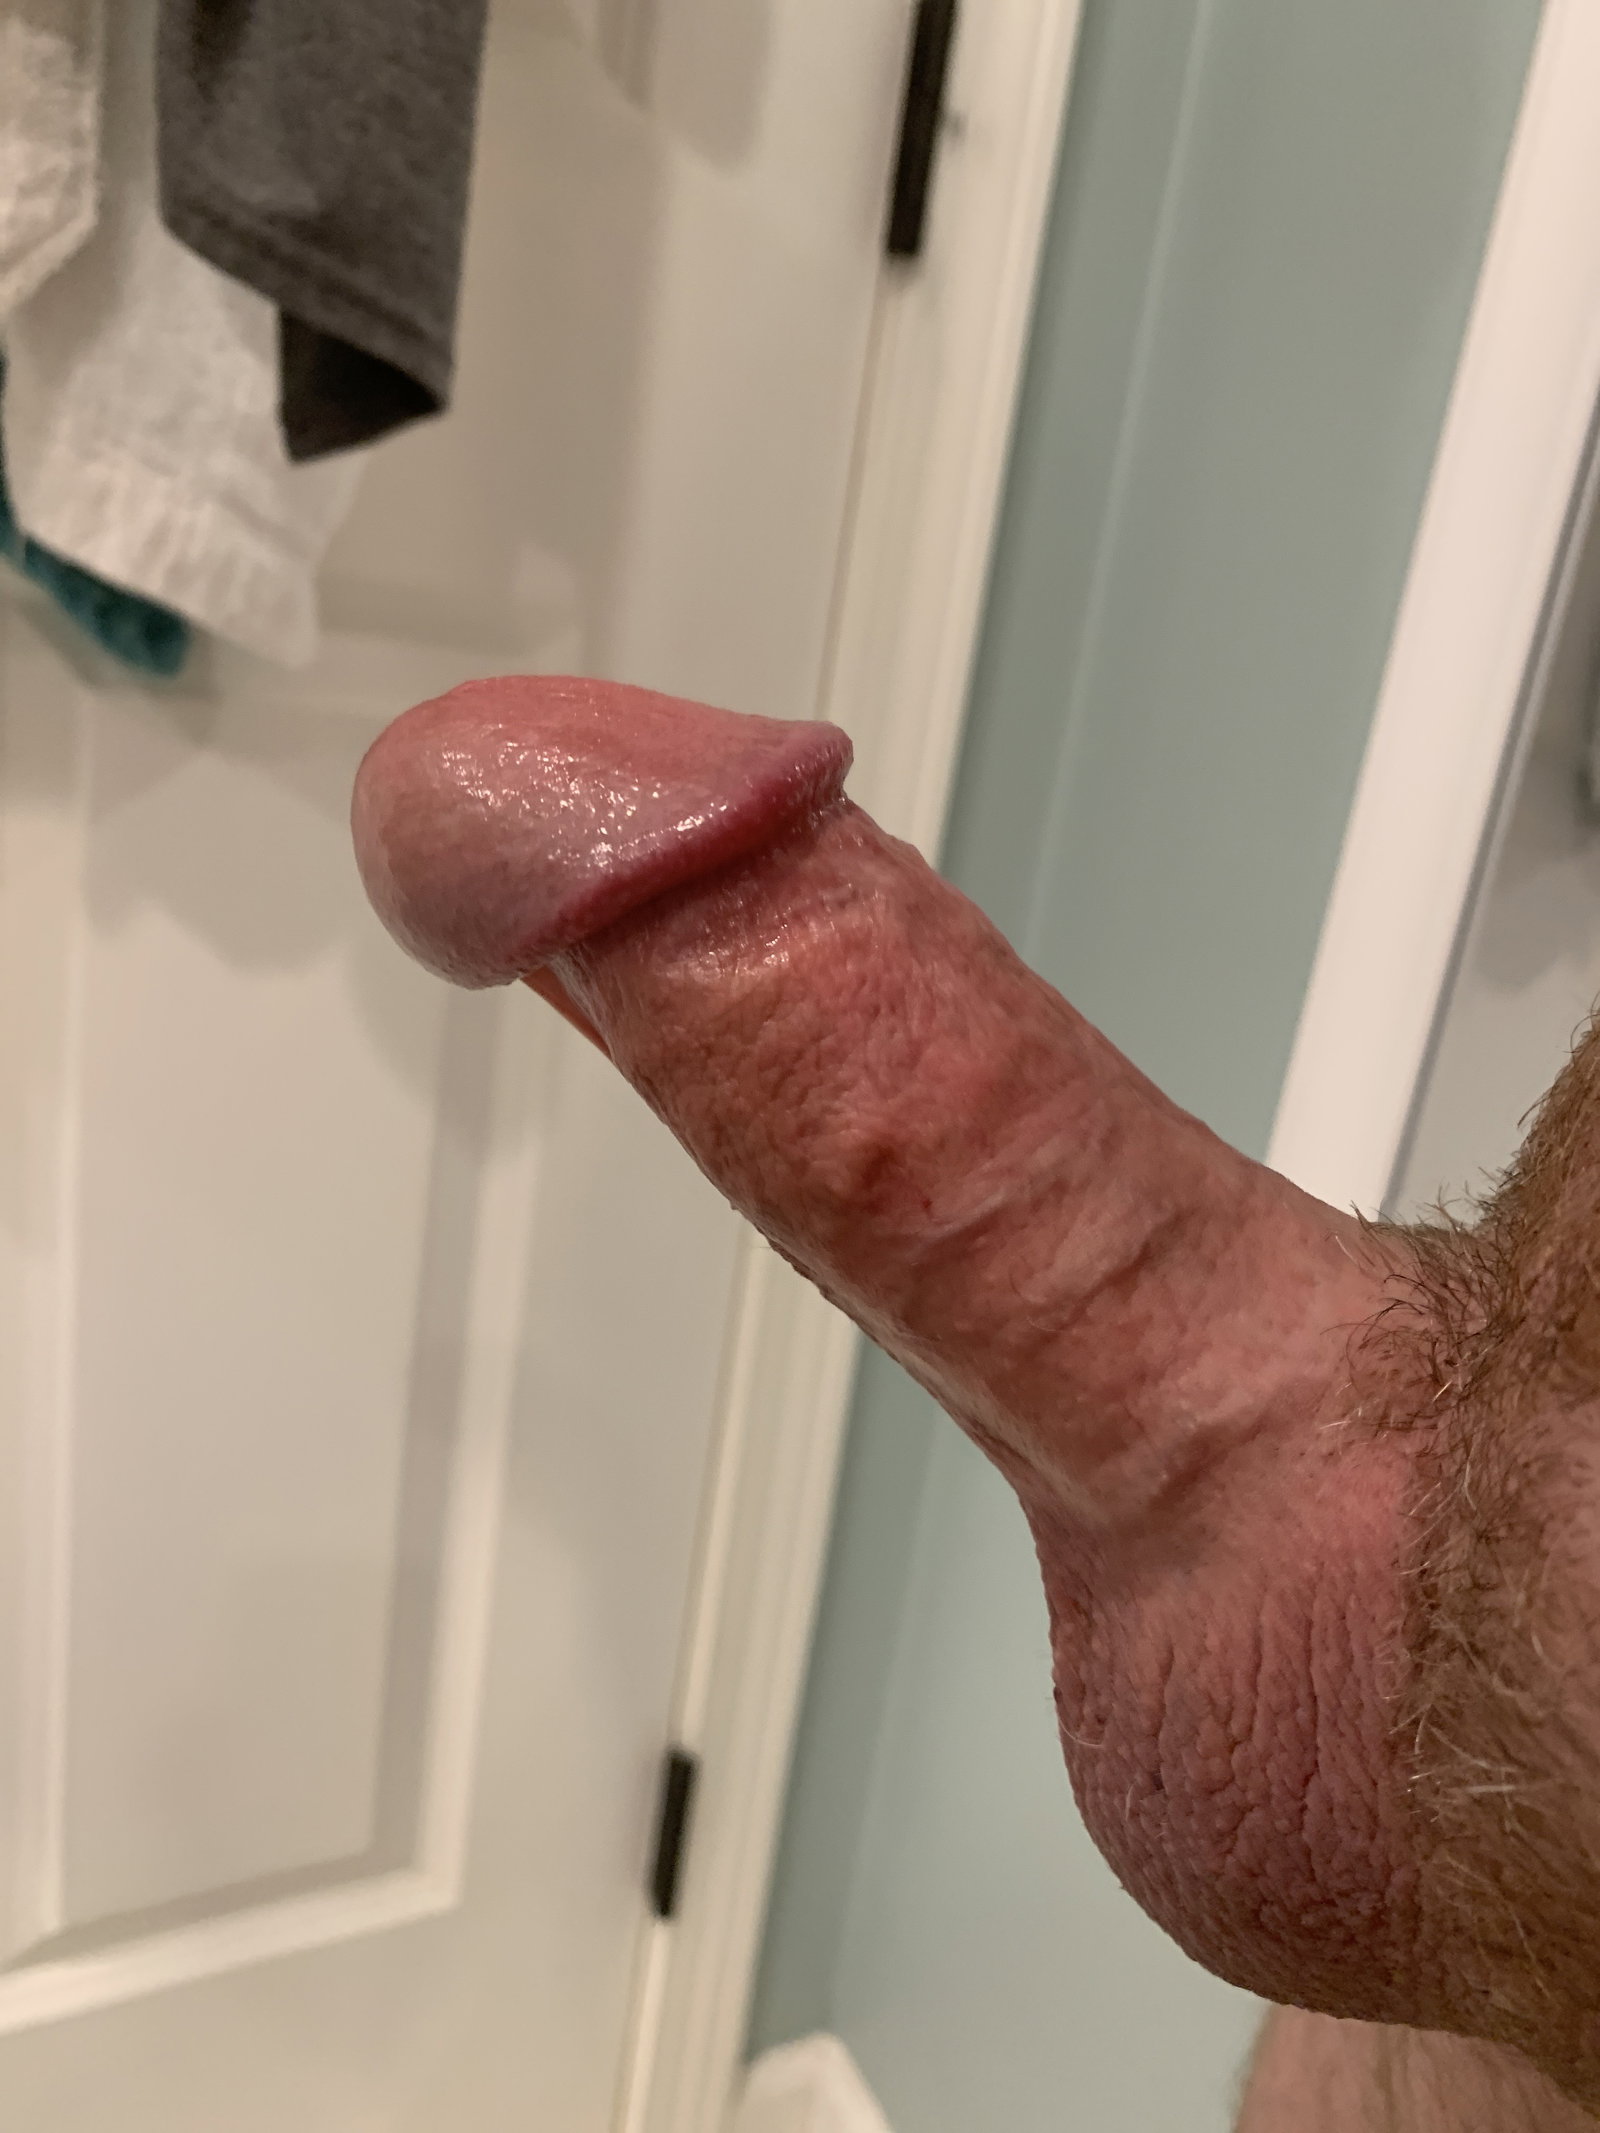 Photo by Lintnwater with the username @Lintnwater, posted on April 28, 2020. The post is about the topic Smooth thigh lover and the text says 'All trimmed up and ready'